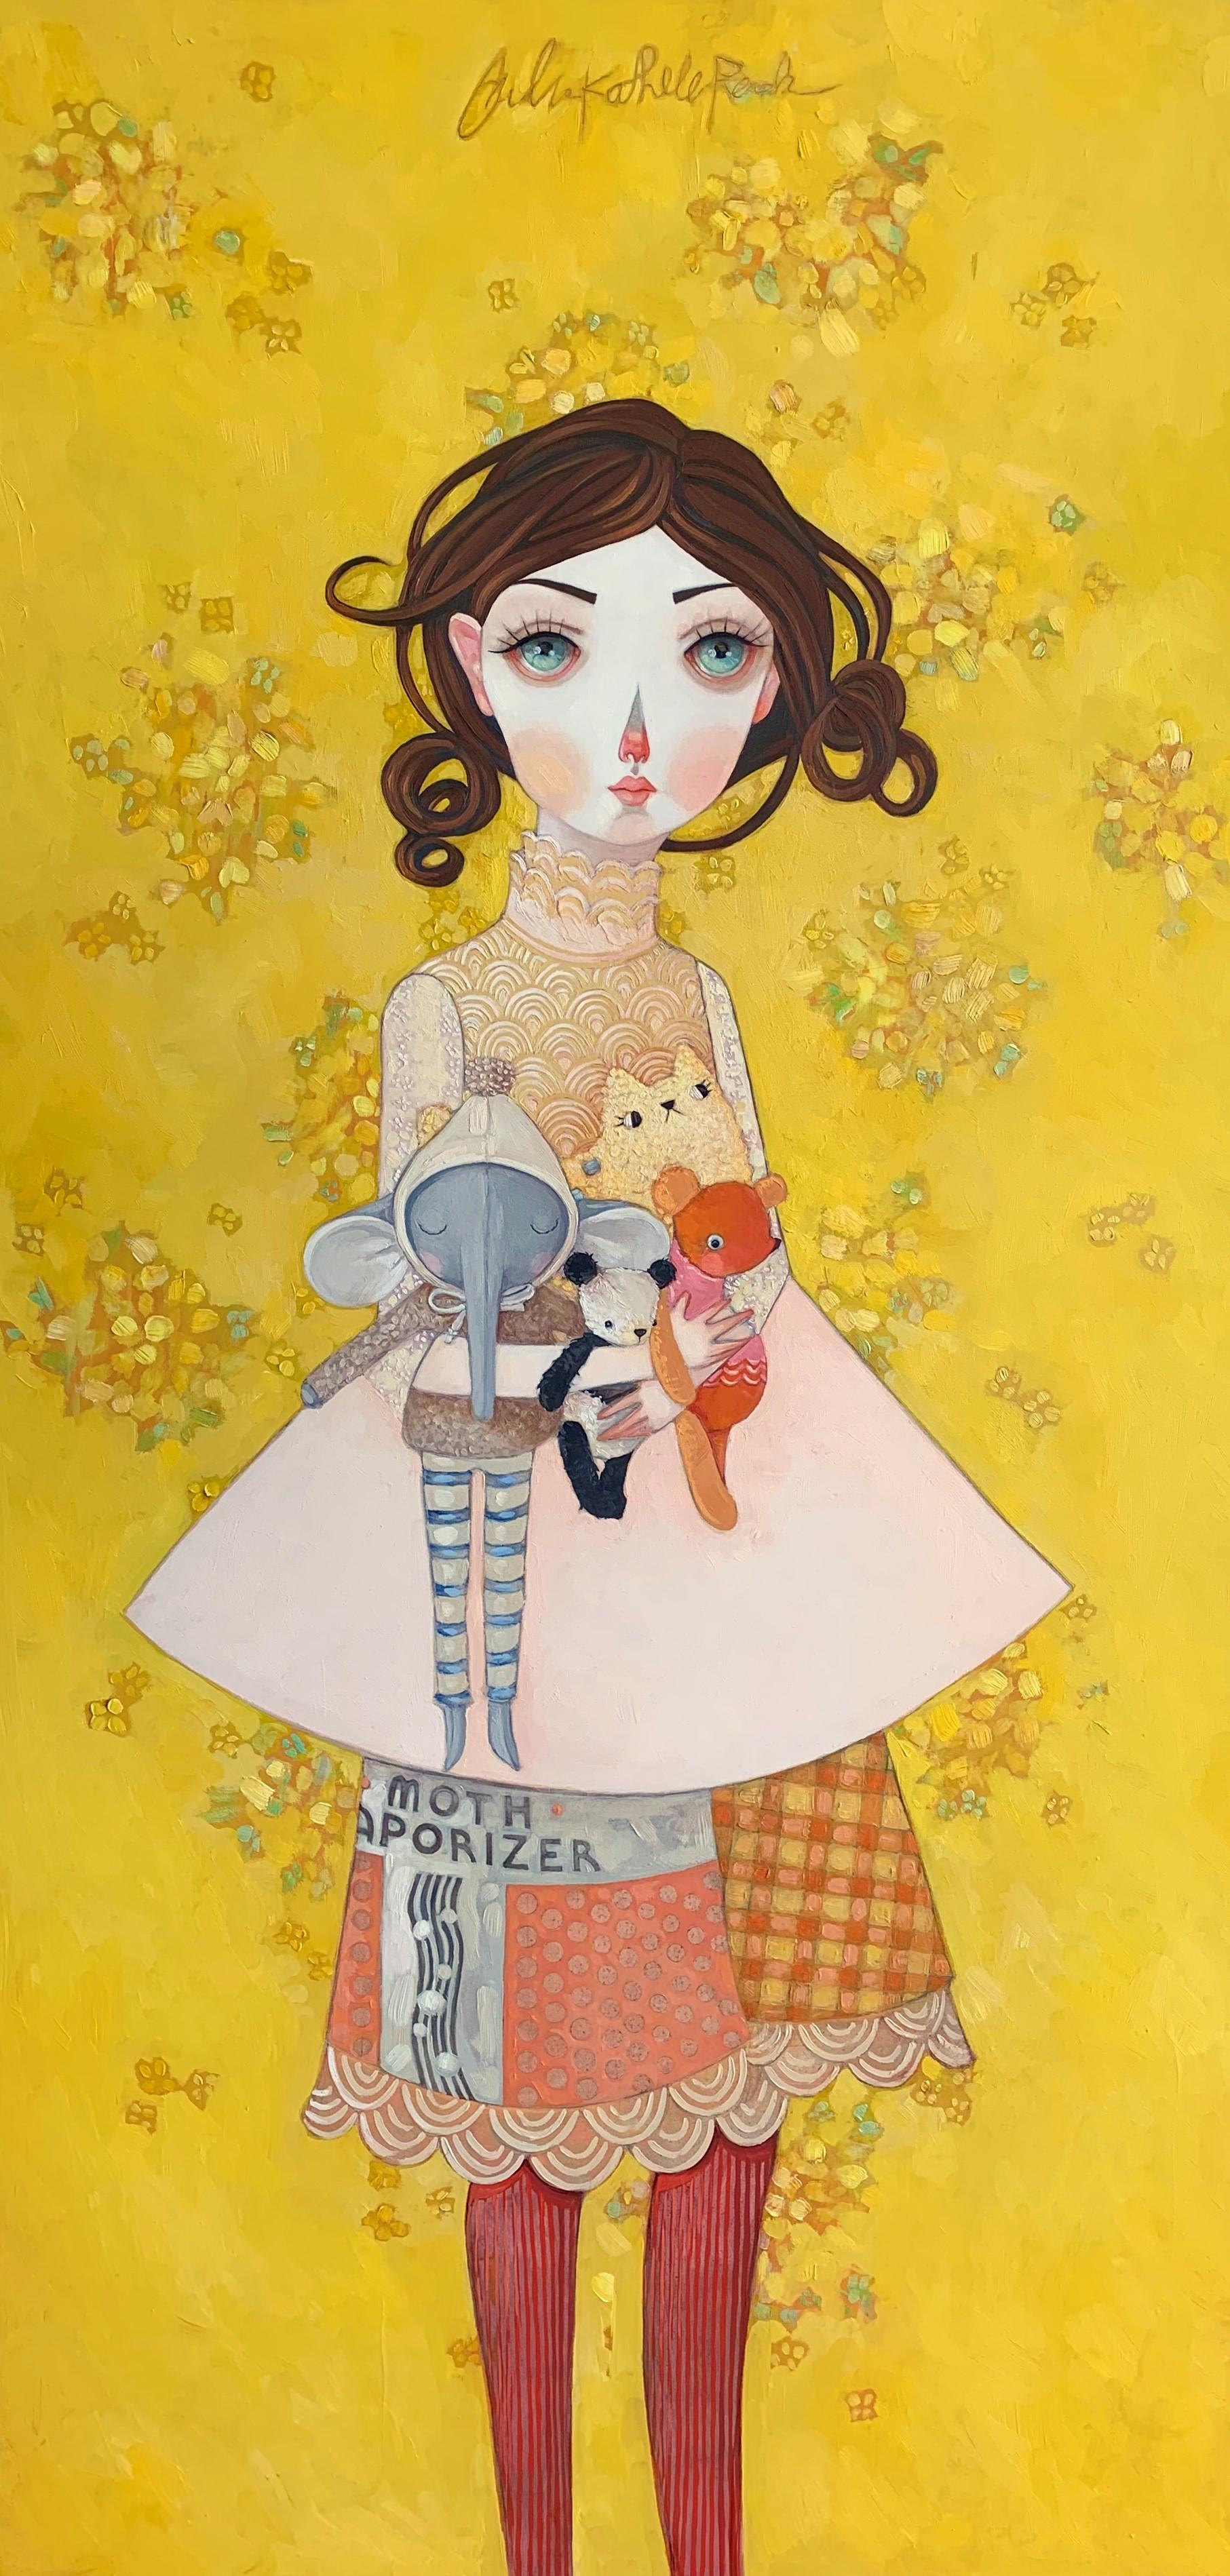 "Daisy" - Painting by Melissa Peck